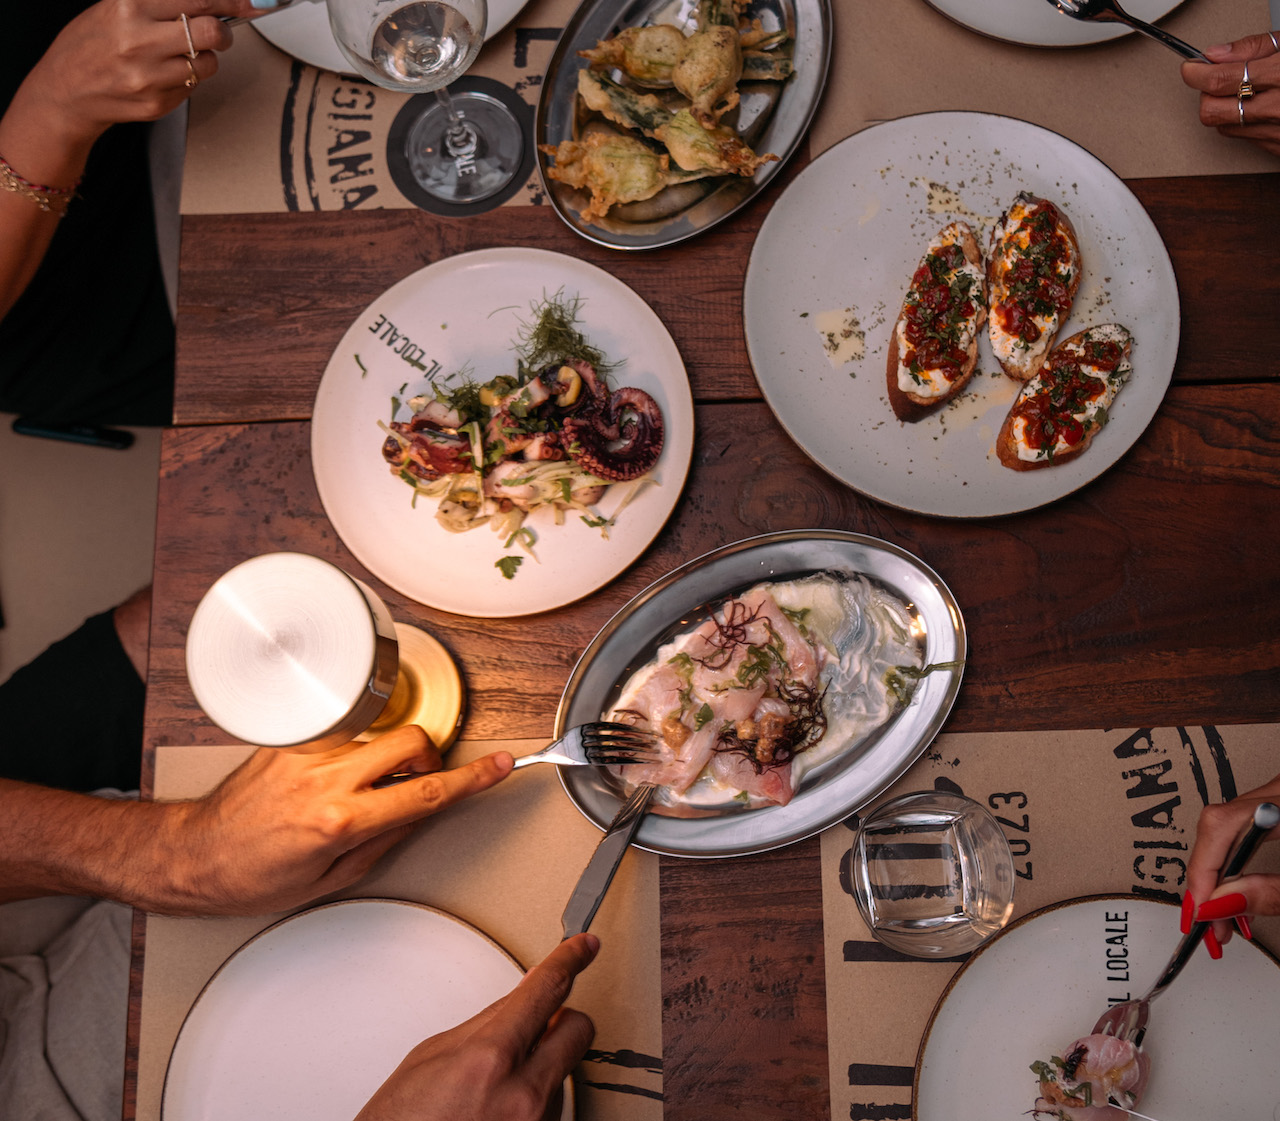 We talk with serial restauranteur Mauro Marcucci about Il Locale Produzione Artigianale, his exciting new eatery in Bali's thriving Berawa neighbourhood. 